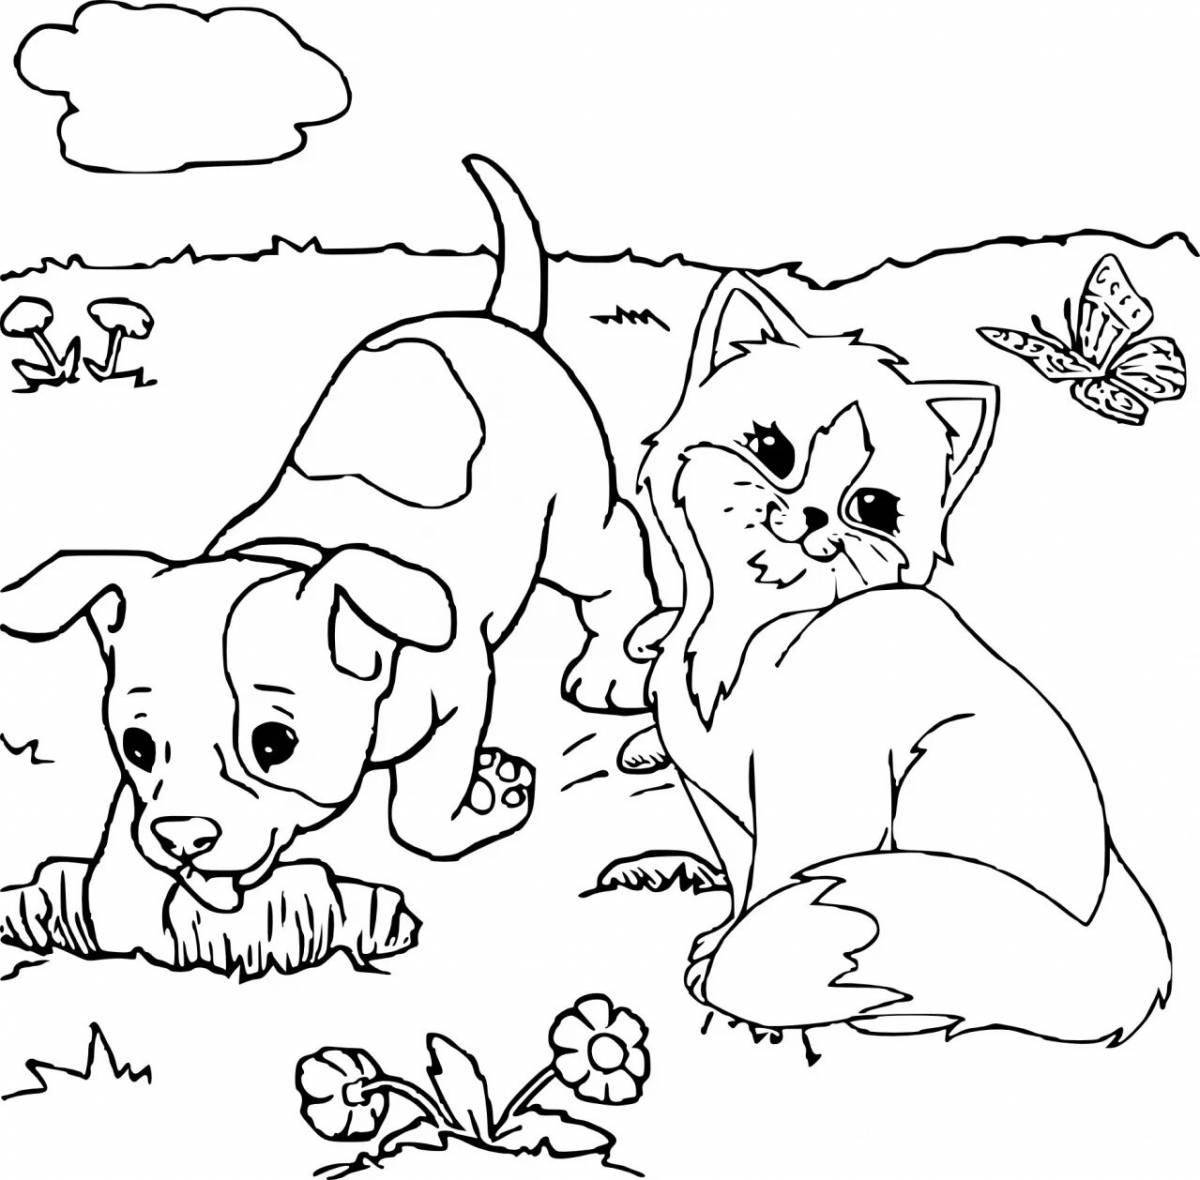 Coloring page happy kittens and puppies